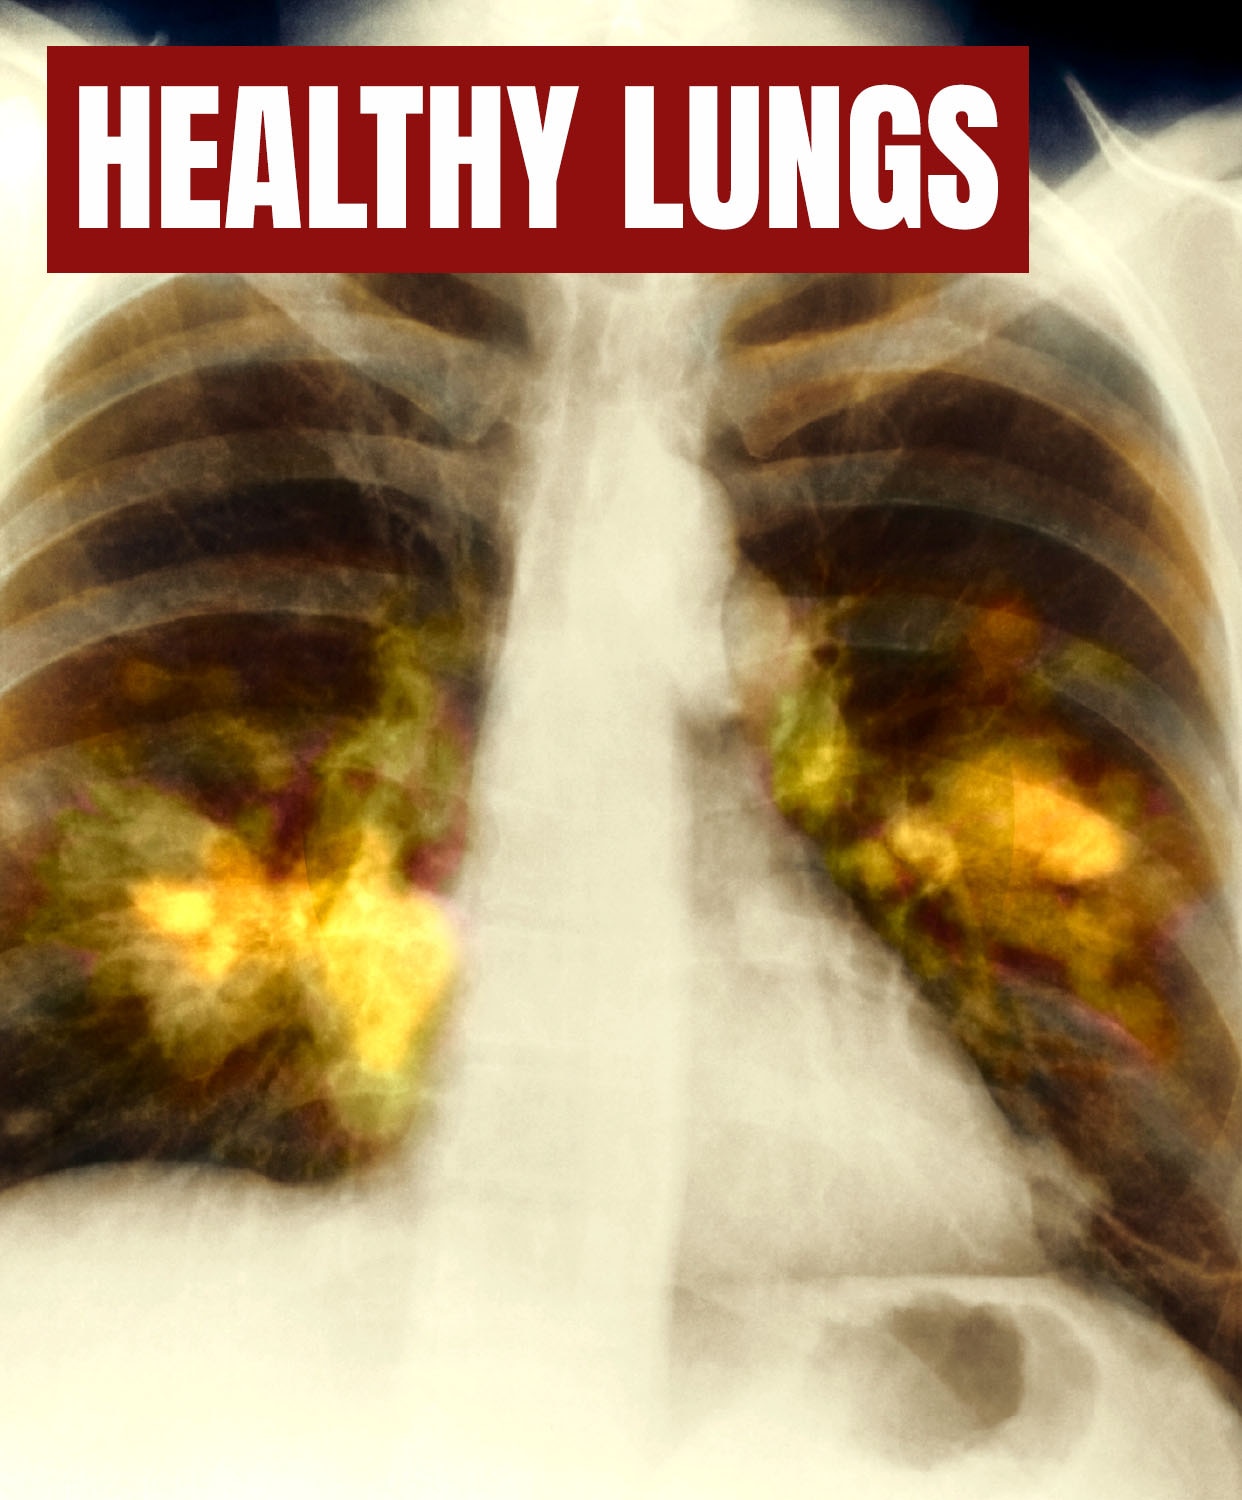 Smoking can cost you healthy lungs